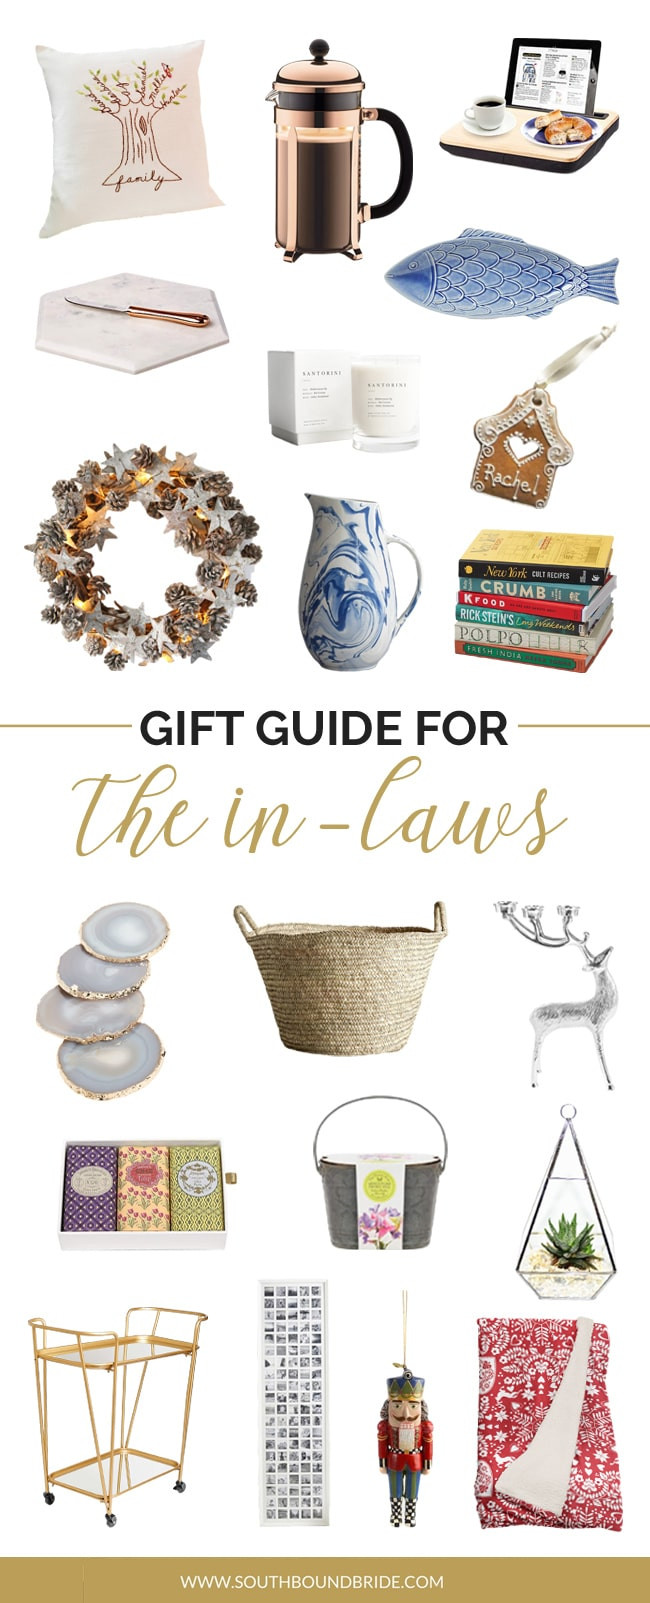 In Laws Christmas Gift Ideas
 Christmas Gift Ideas for Your New In Laws